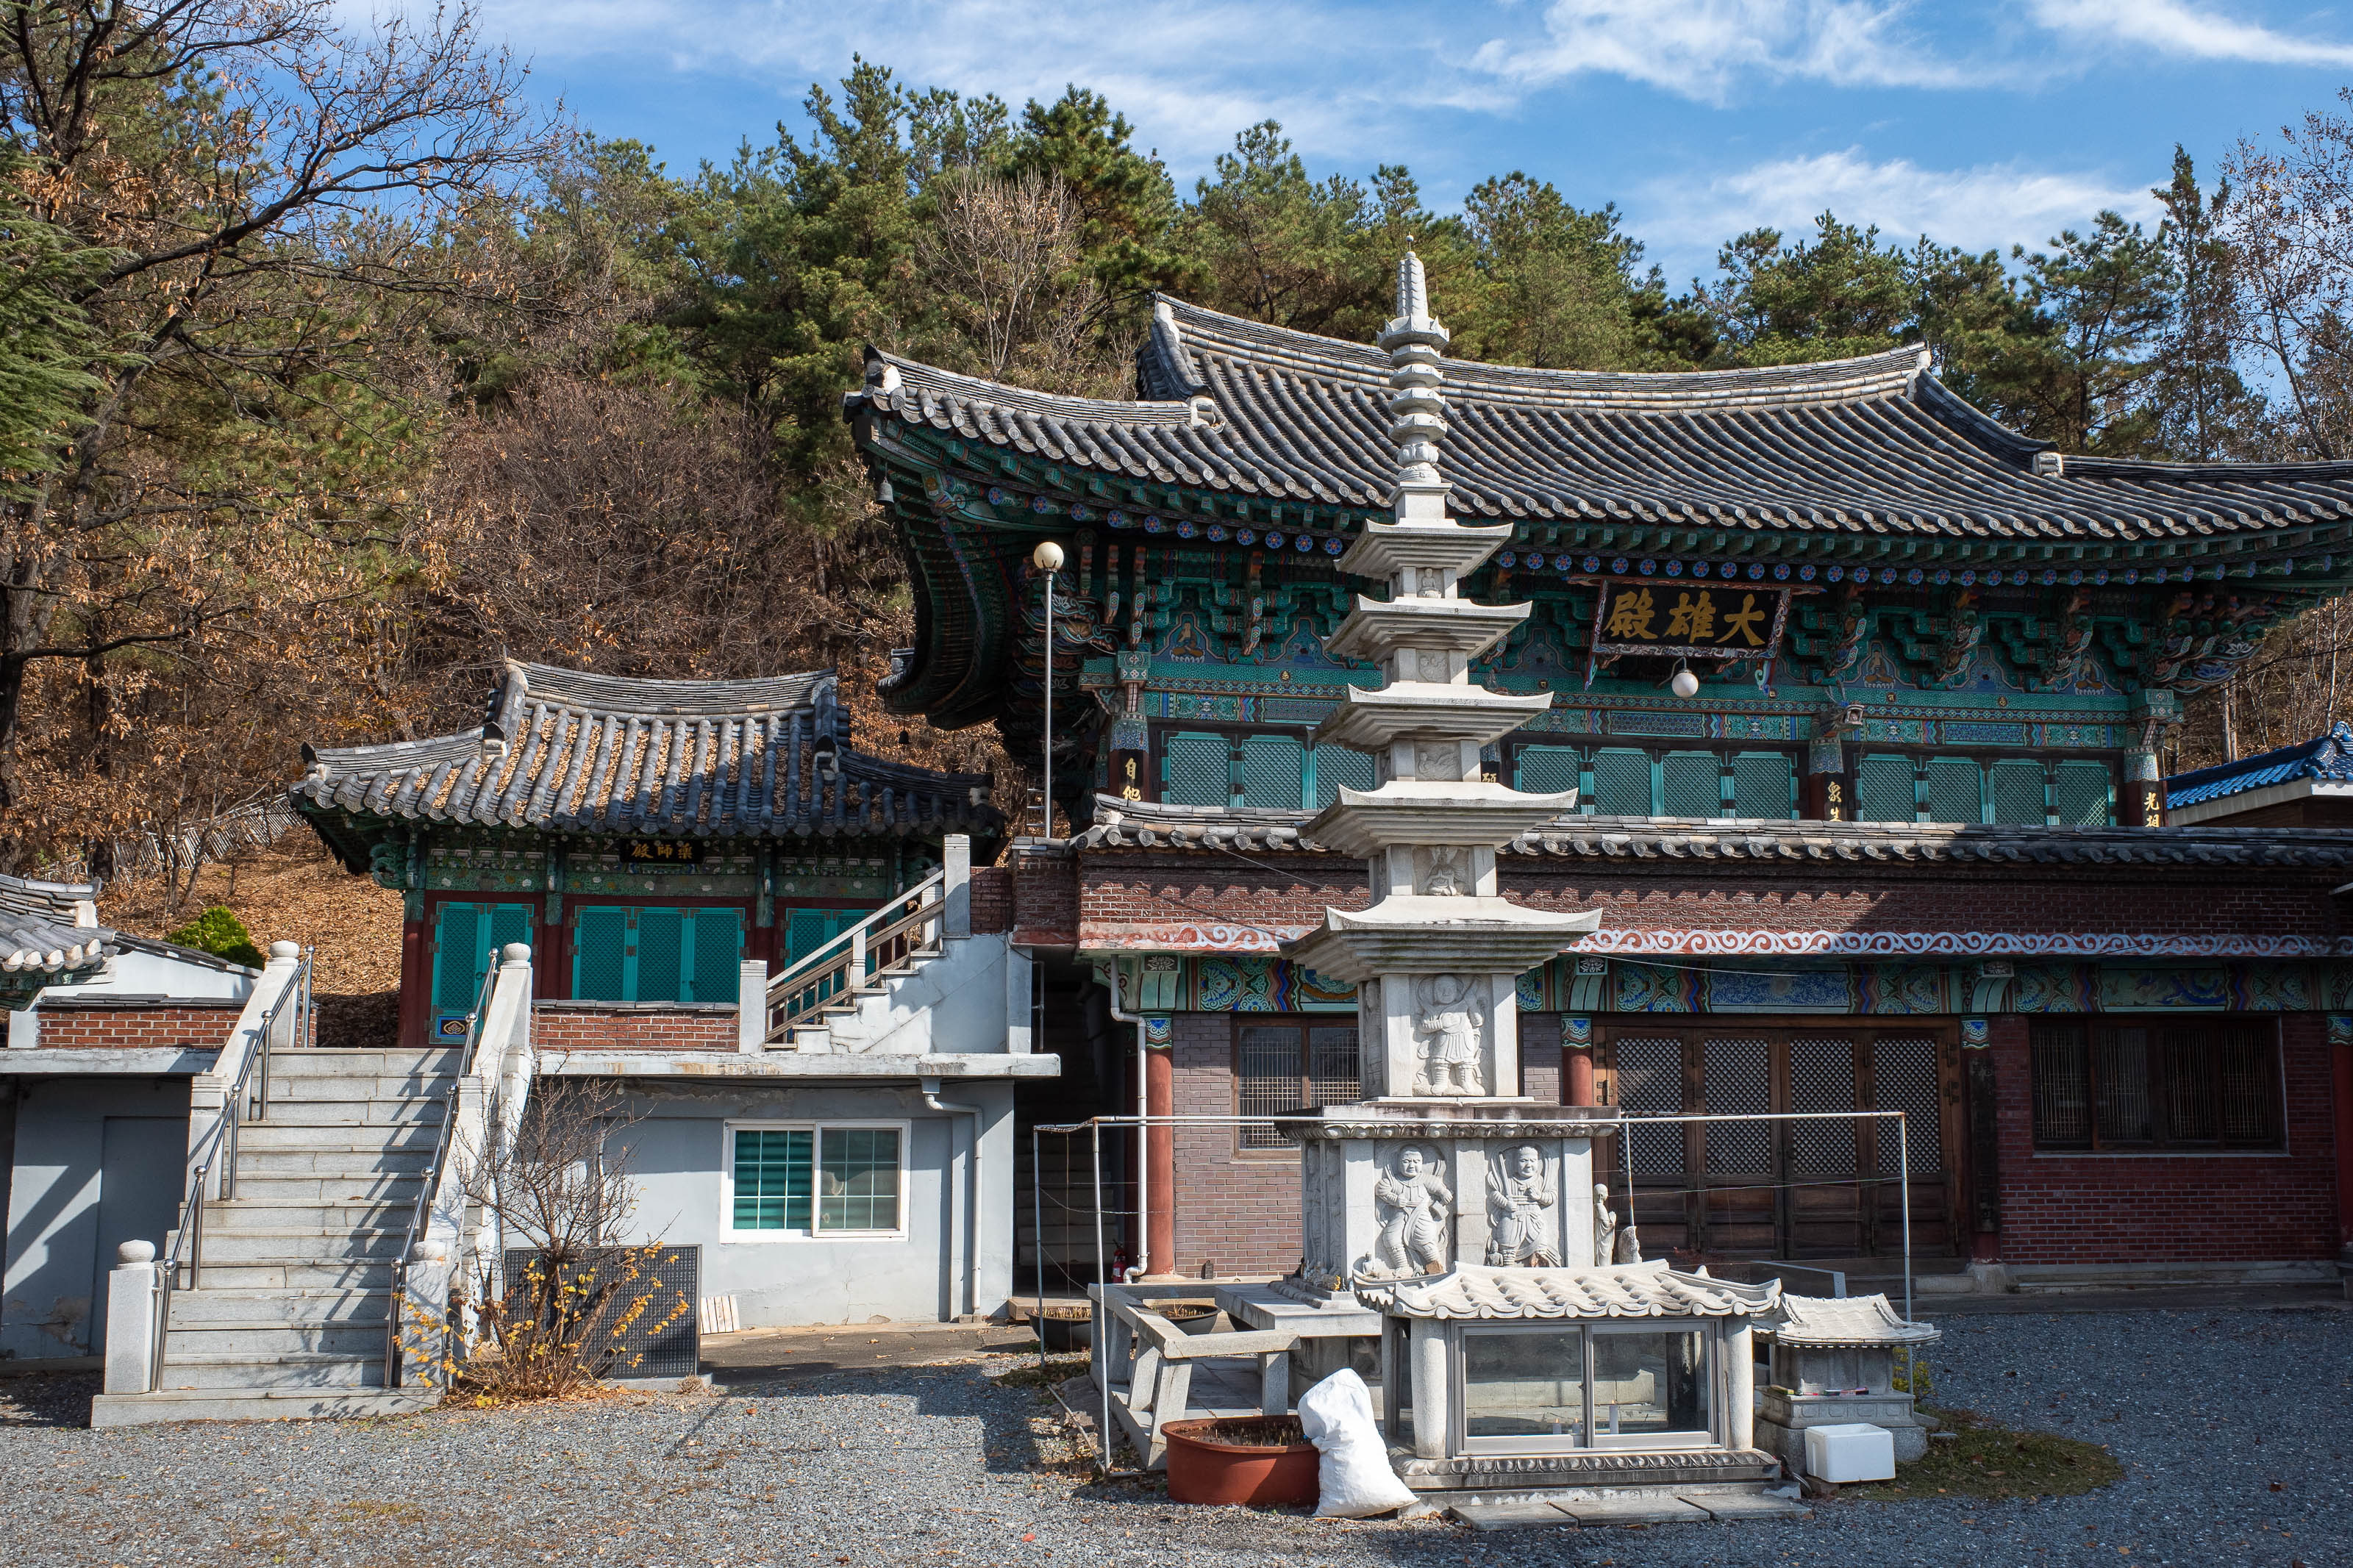 Korean-Hiking-Daejeon-Bomunsan - My path up Sikjangsan started at this shrine. It will not be the last shrine.